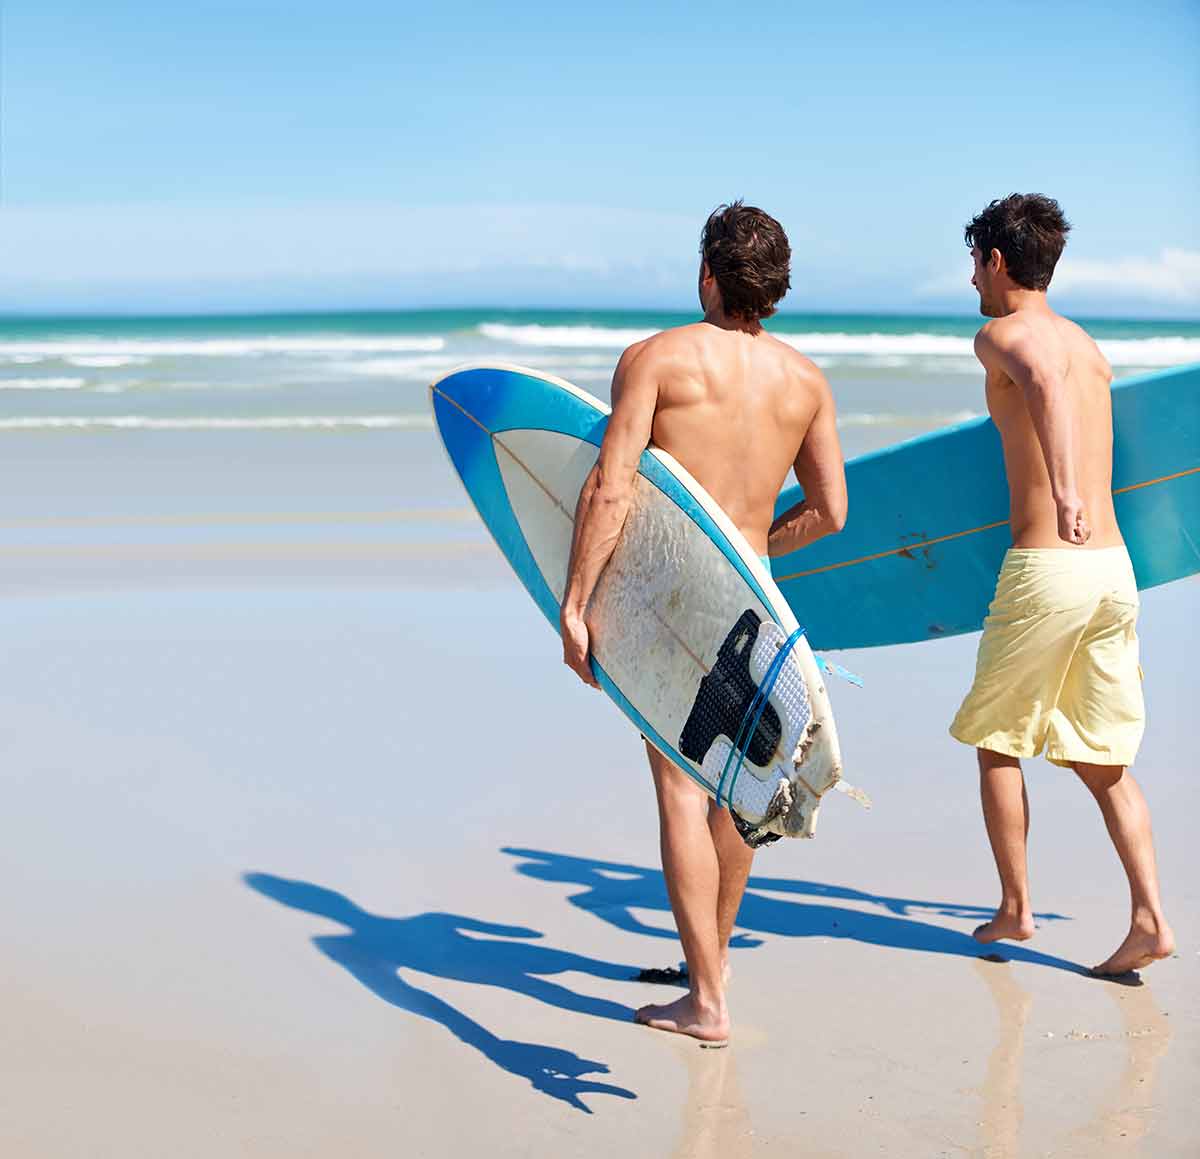 Summer Vacation, Workout Or Water Sports Hobby In Hawaii